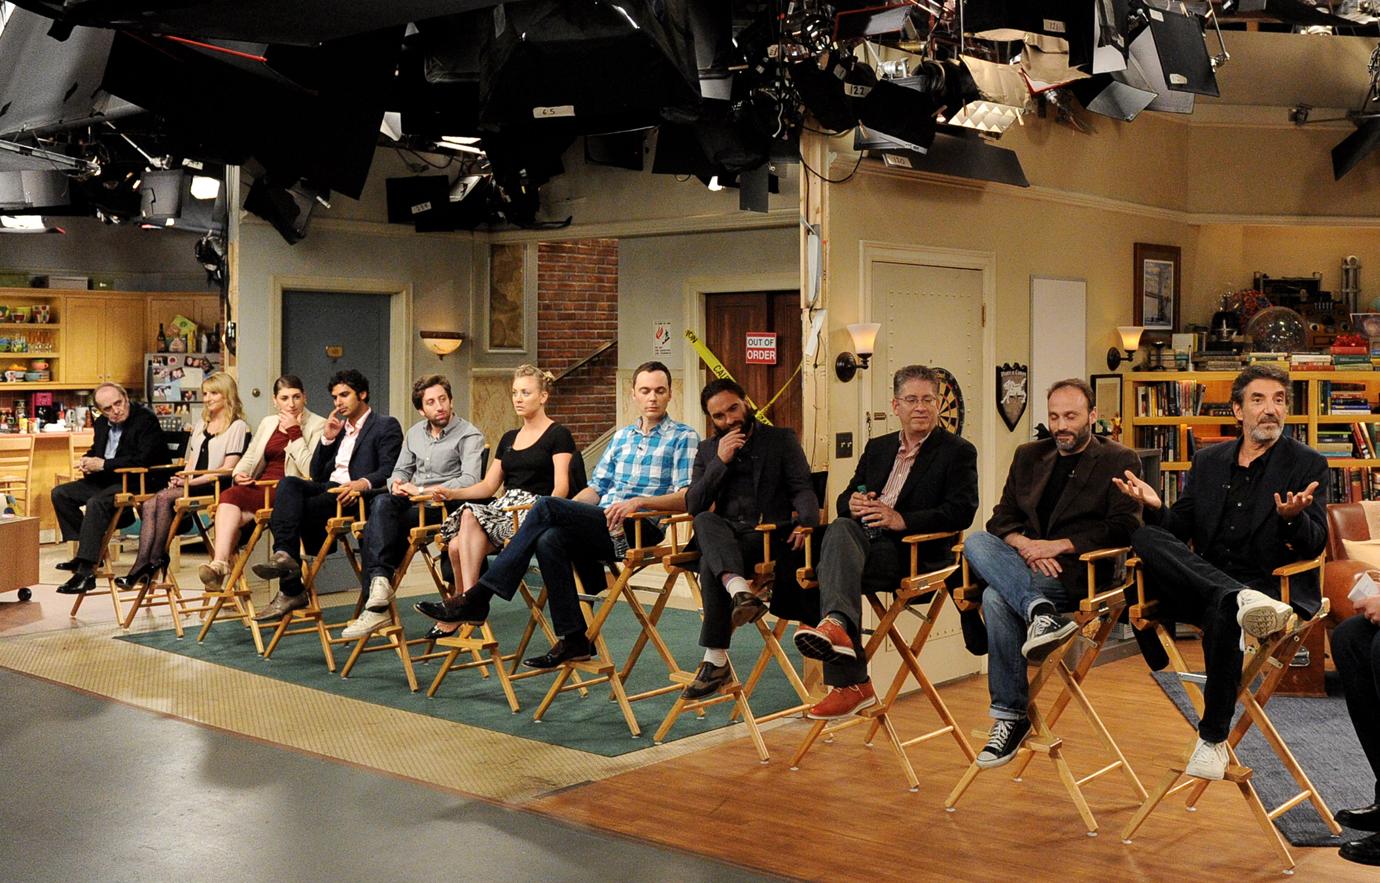 Secrets from the set of 'Big Bang Theory